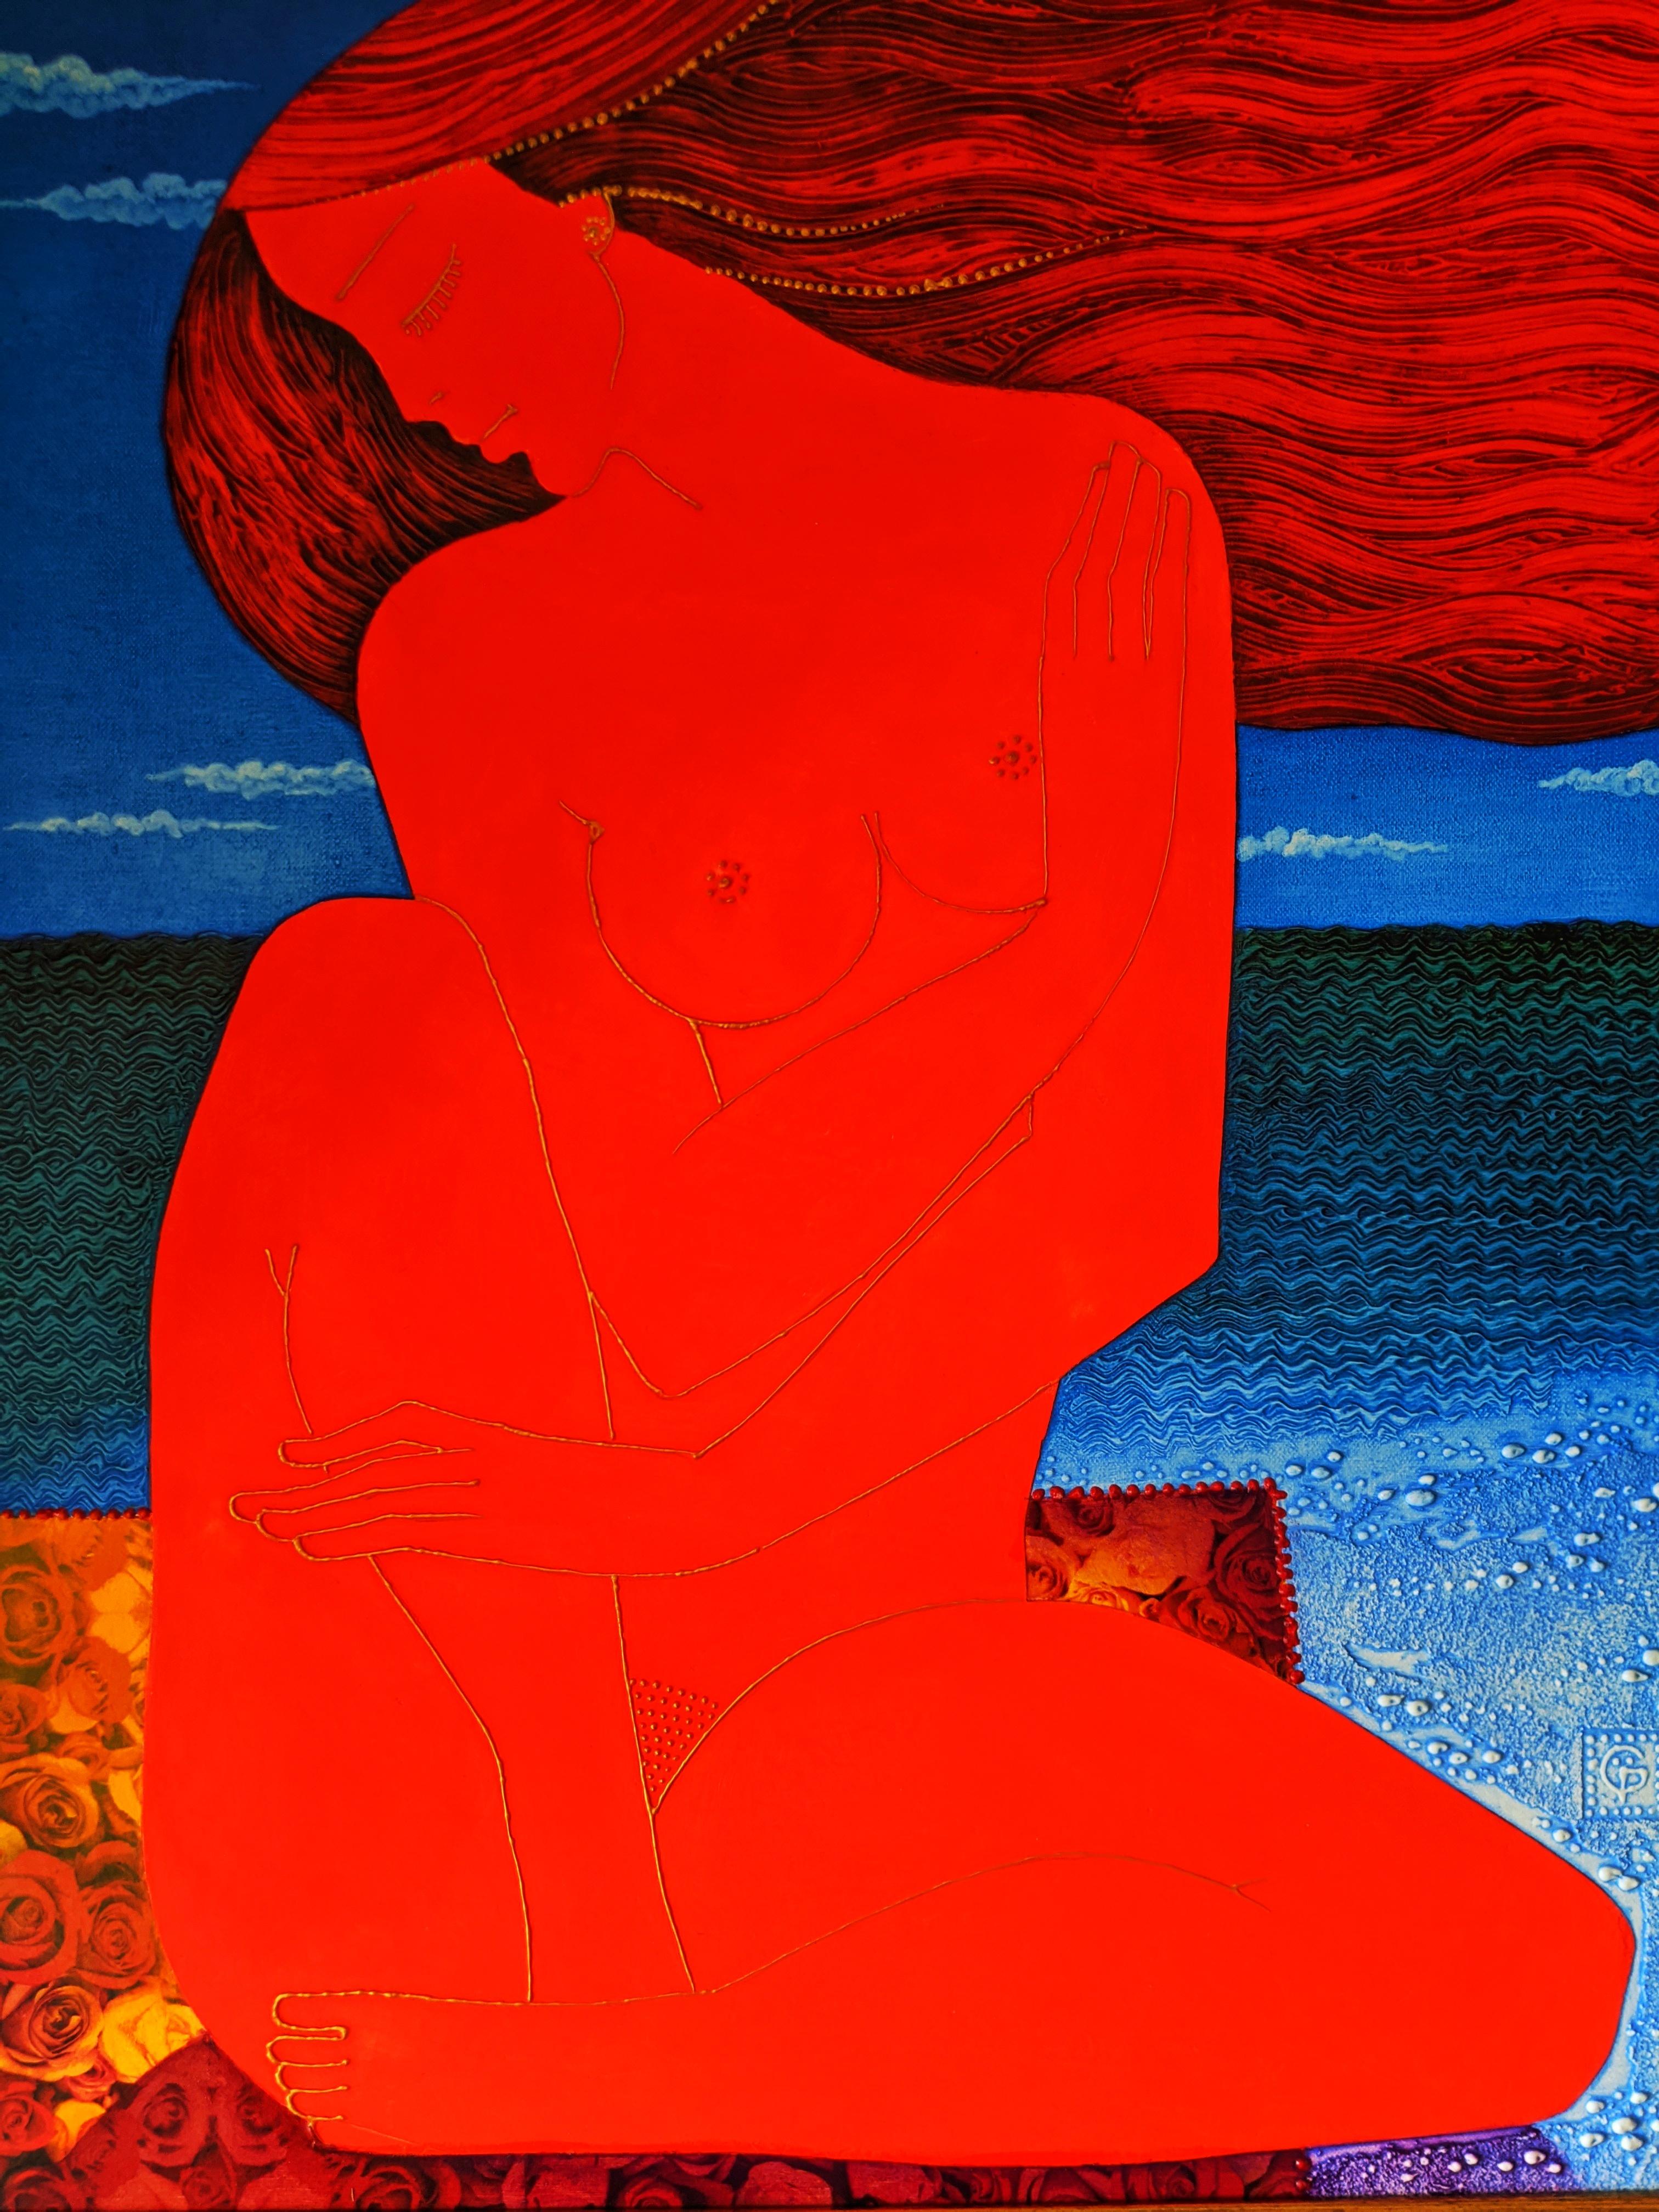 "Summer" is a figurative Nude painting by Maestro Stefano Georges.

About the artwork:

TECHNIQUE:  Mixed media
STYLE: Contemporary
Edition : Unique, signed
Weight: Approximately 3 kg.
The painting is unframed.
Frame: Optional

Snow Pearl gallery